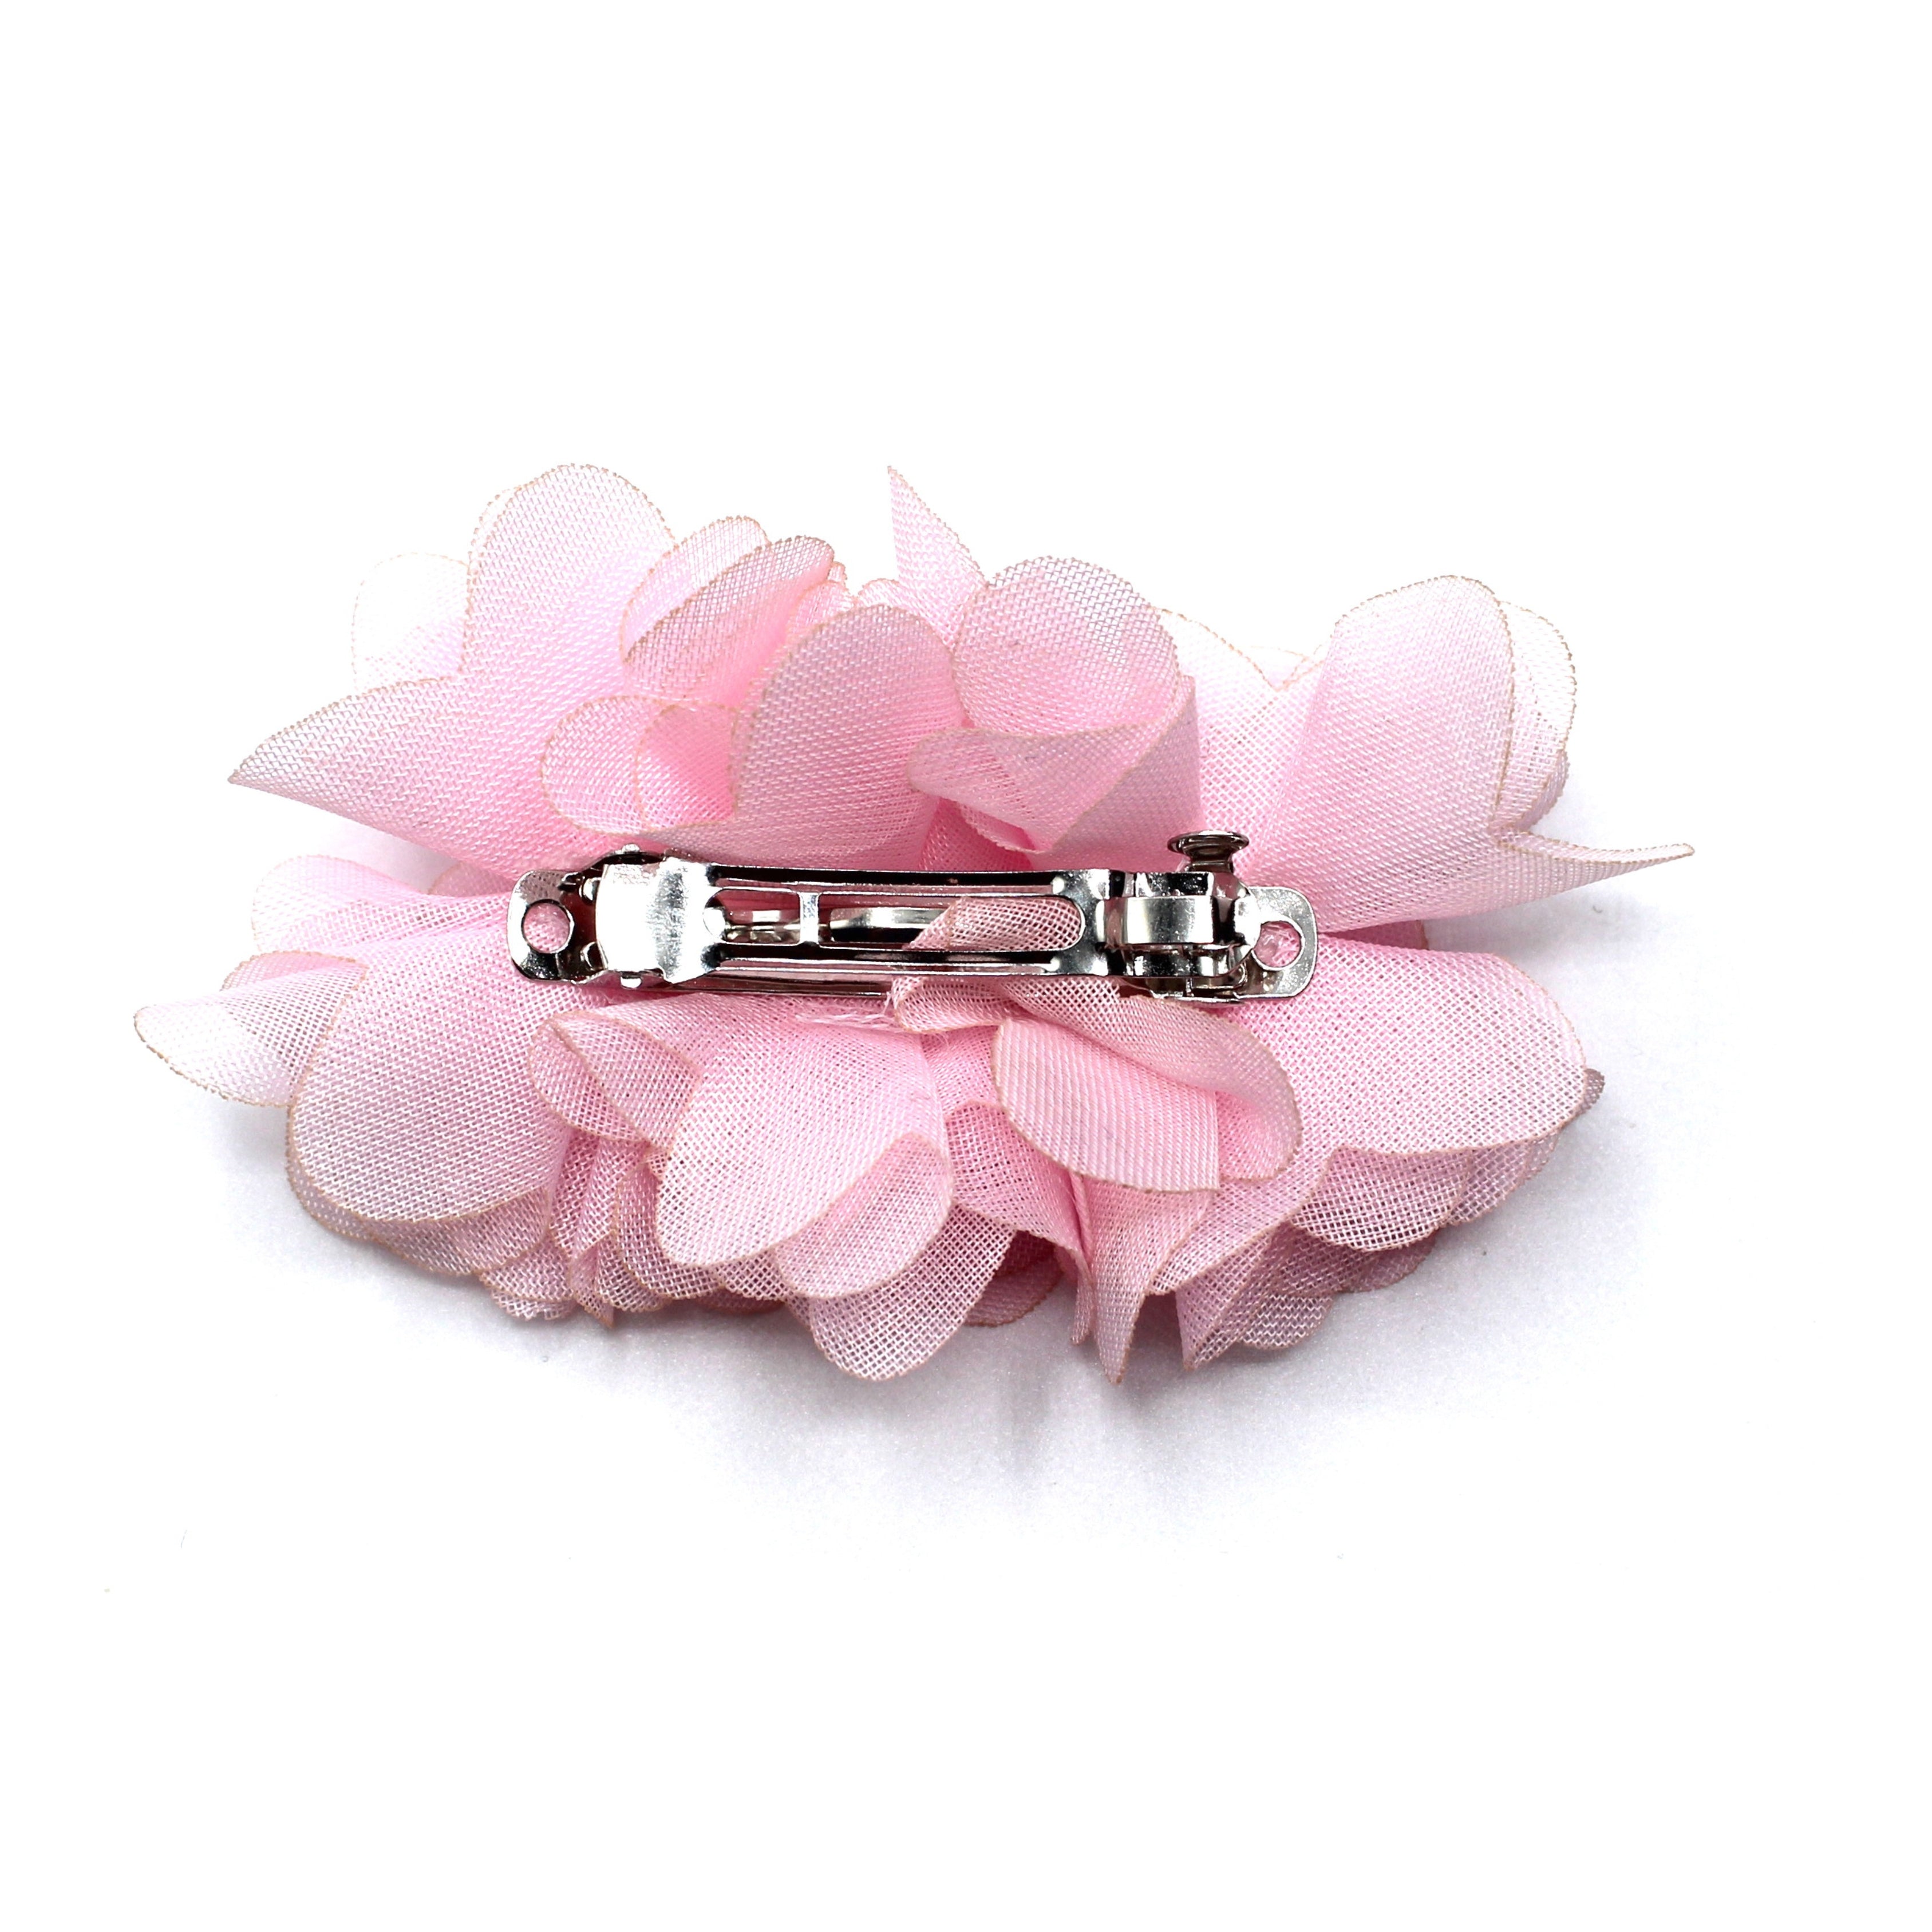 Back View of Pink Flower Hair Barrette